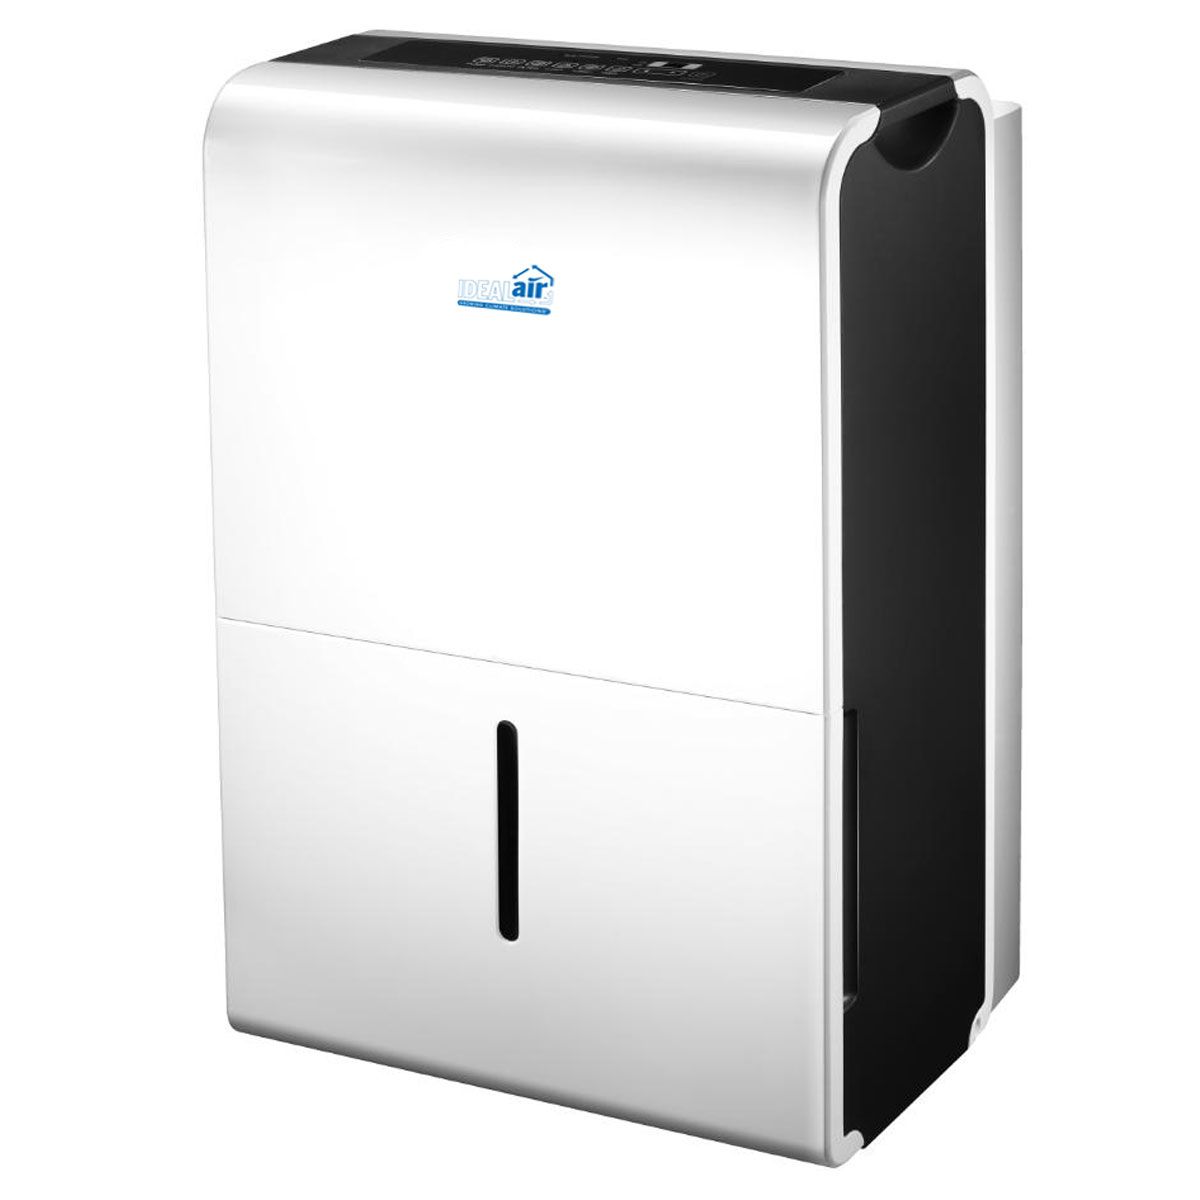 Product Secondary Image:Ideal-Air Dehumidifier 50 Pint